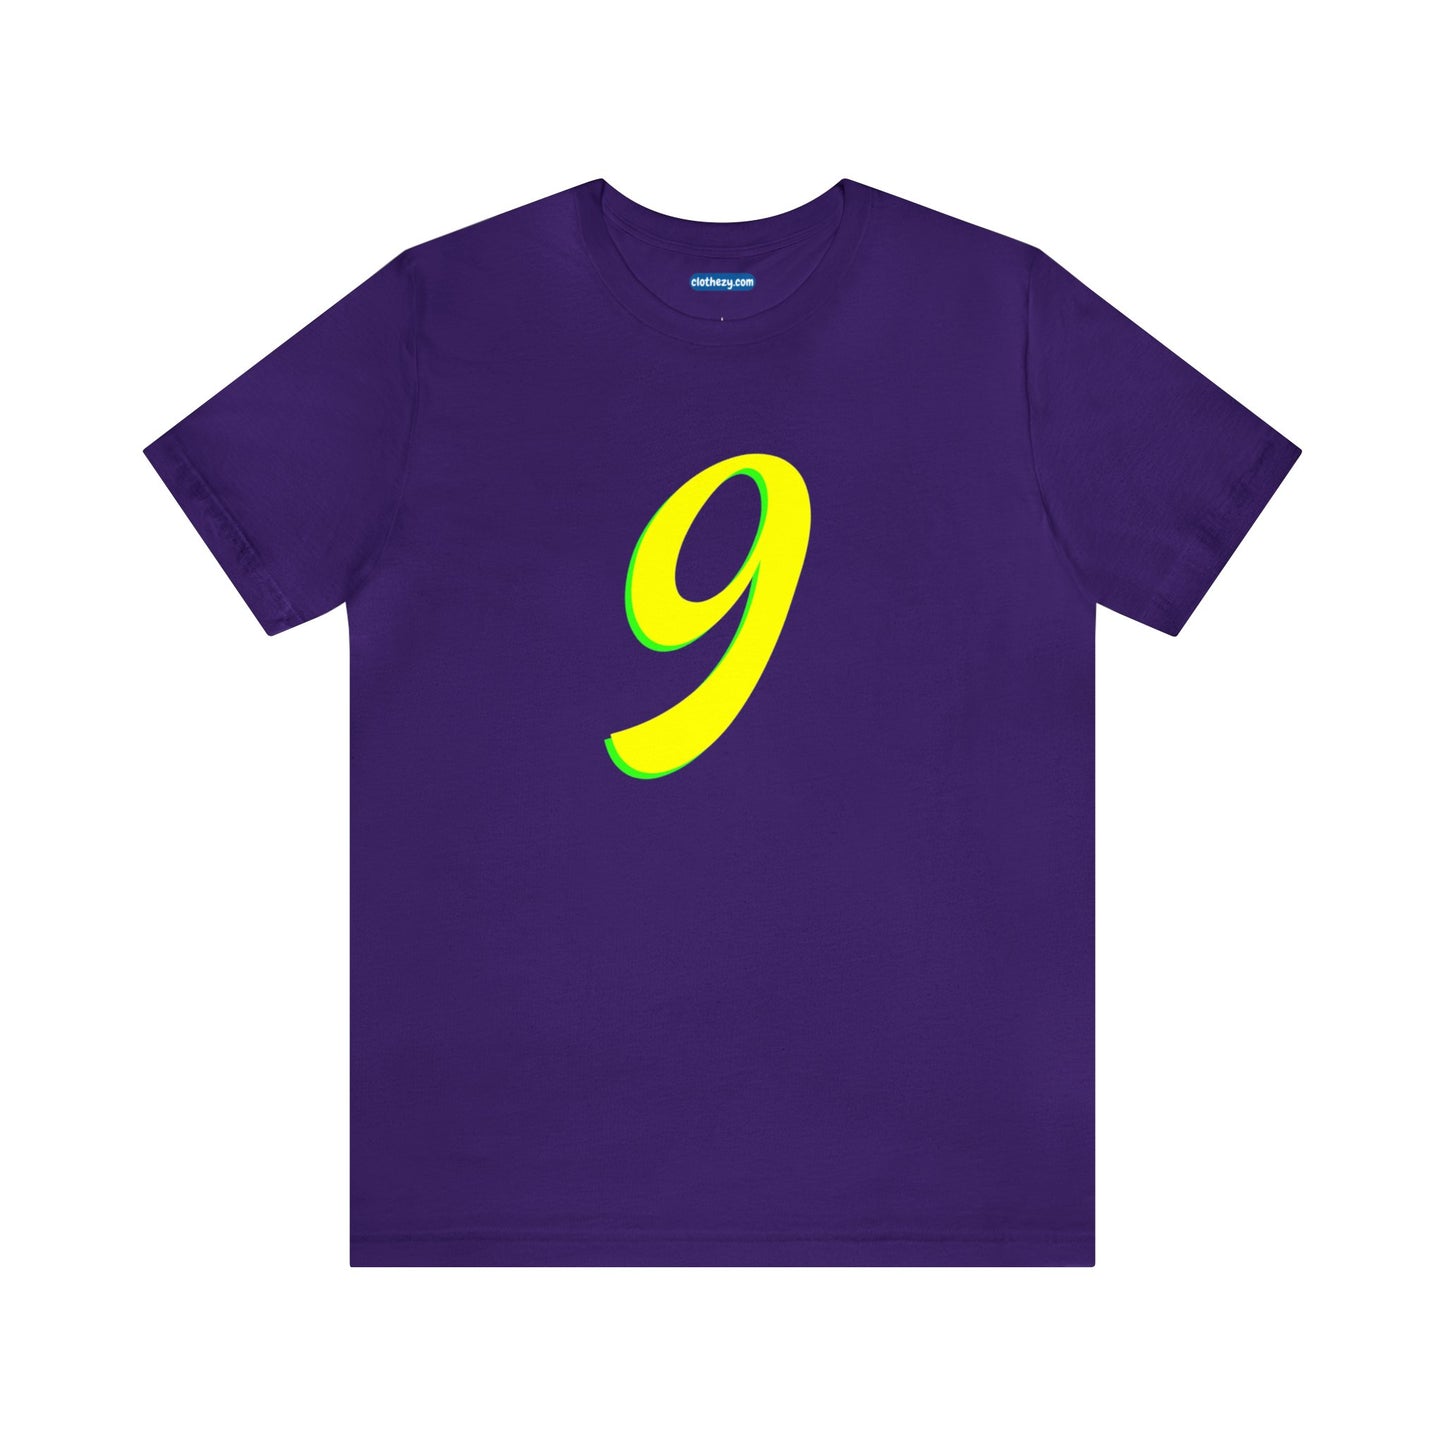 Number 9 Design - Soft Cotton Tee for birthdays and celebrations, Gift for friends and family, Multiple Options by clothezy.com in Purple Size Small - Buy Now